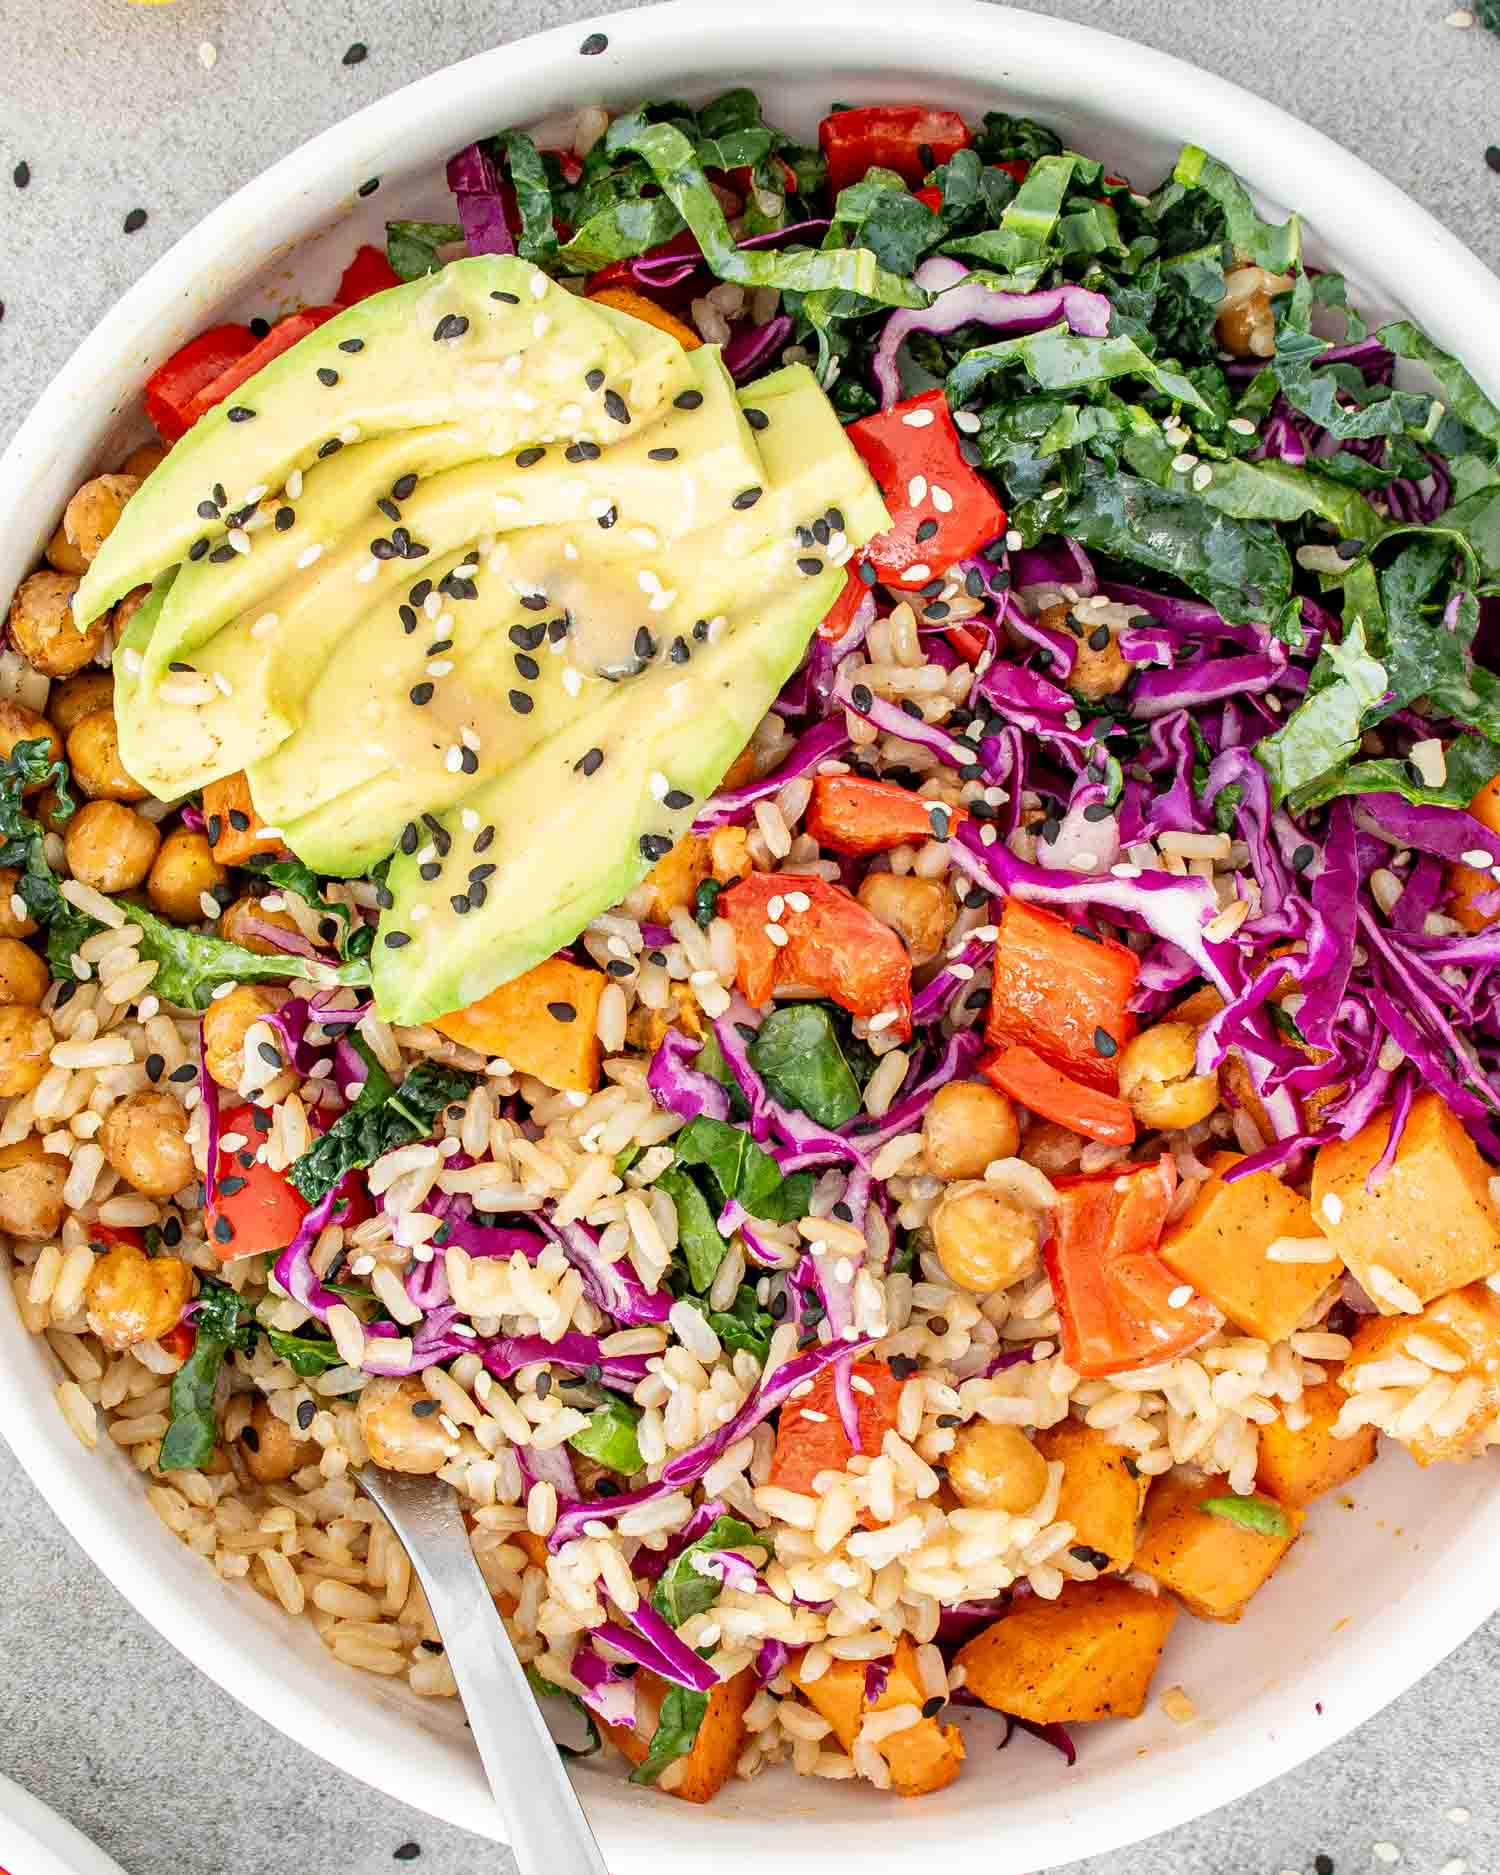 A colorful Buddha bowl with avocado, chickpeas, rice, and mixed vegetables, garnished with black sesame seeds.